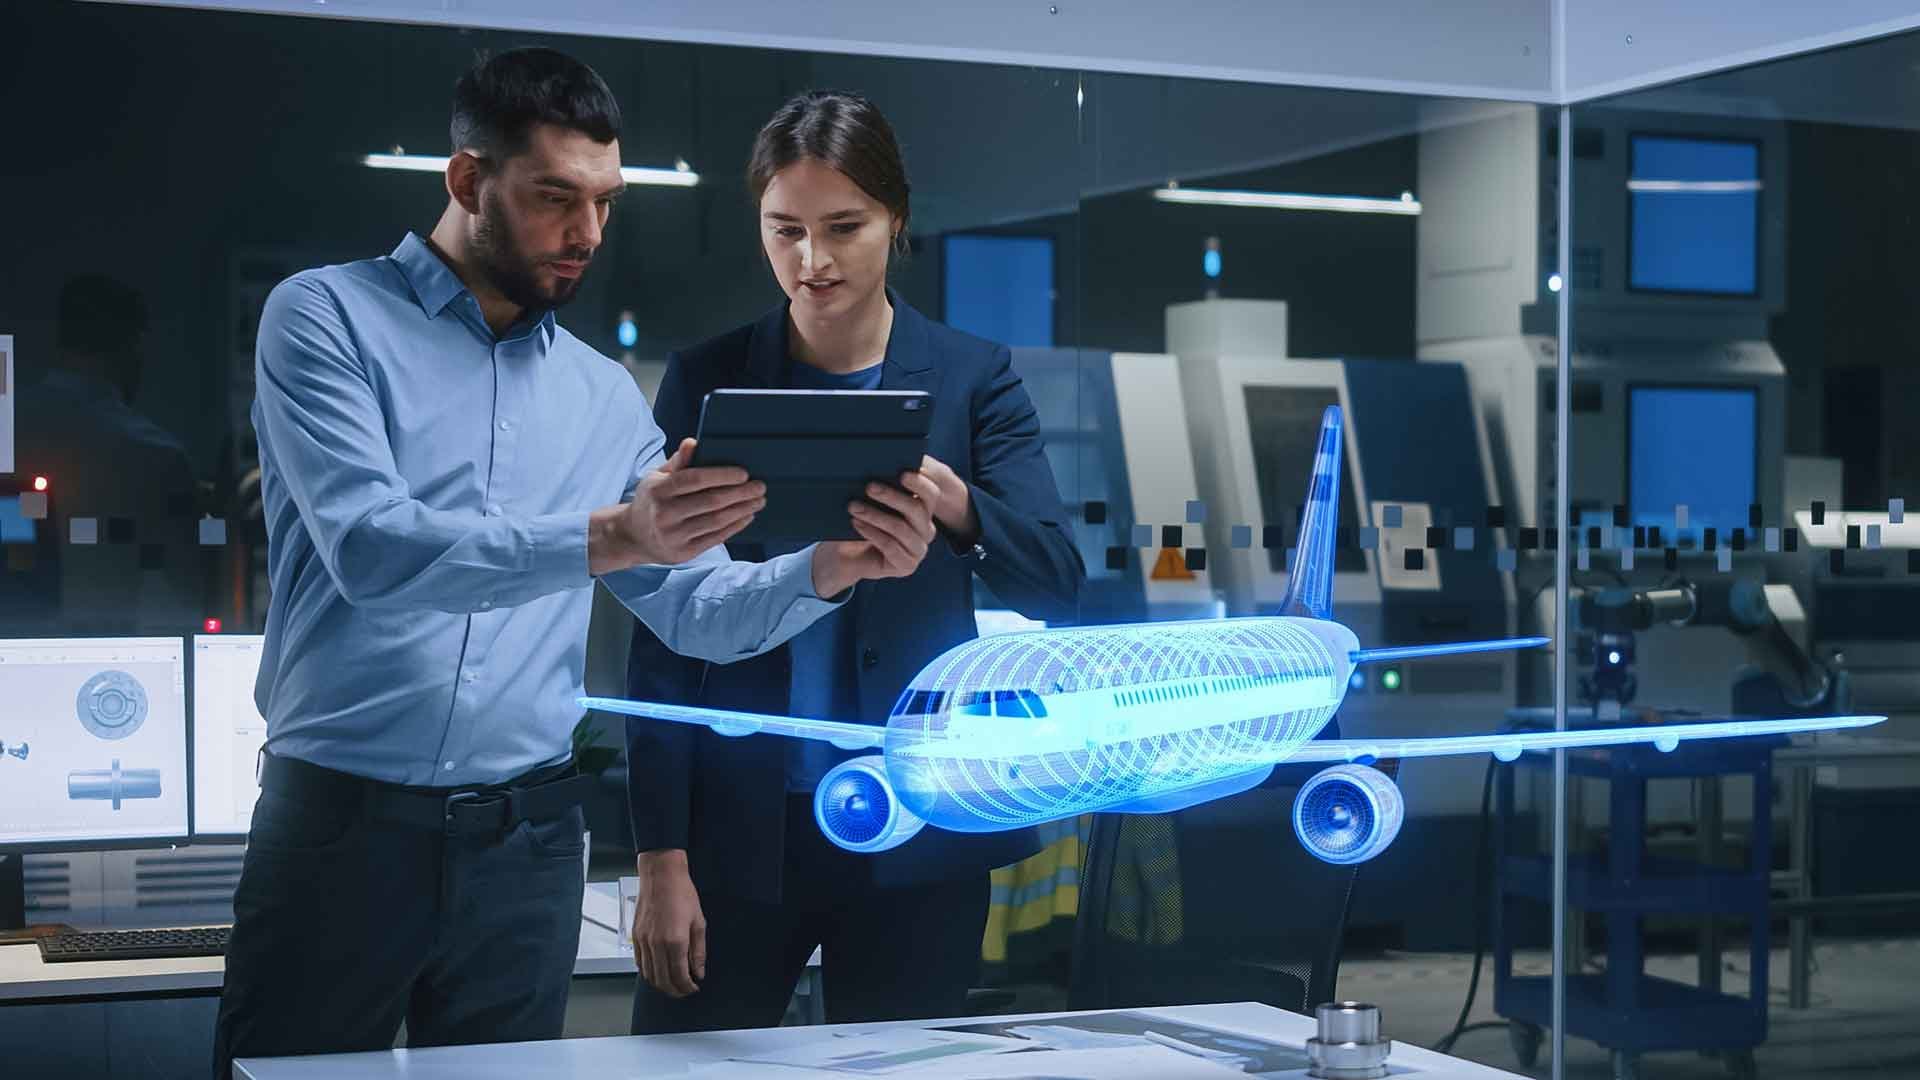 Using Augmented Reality for marketing to showcase an aeroplane design